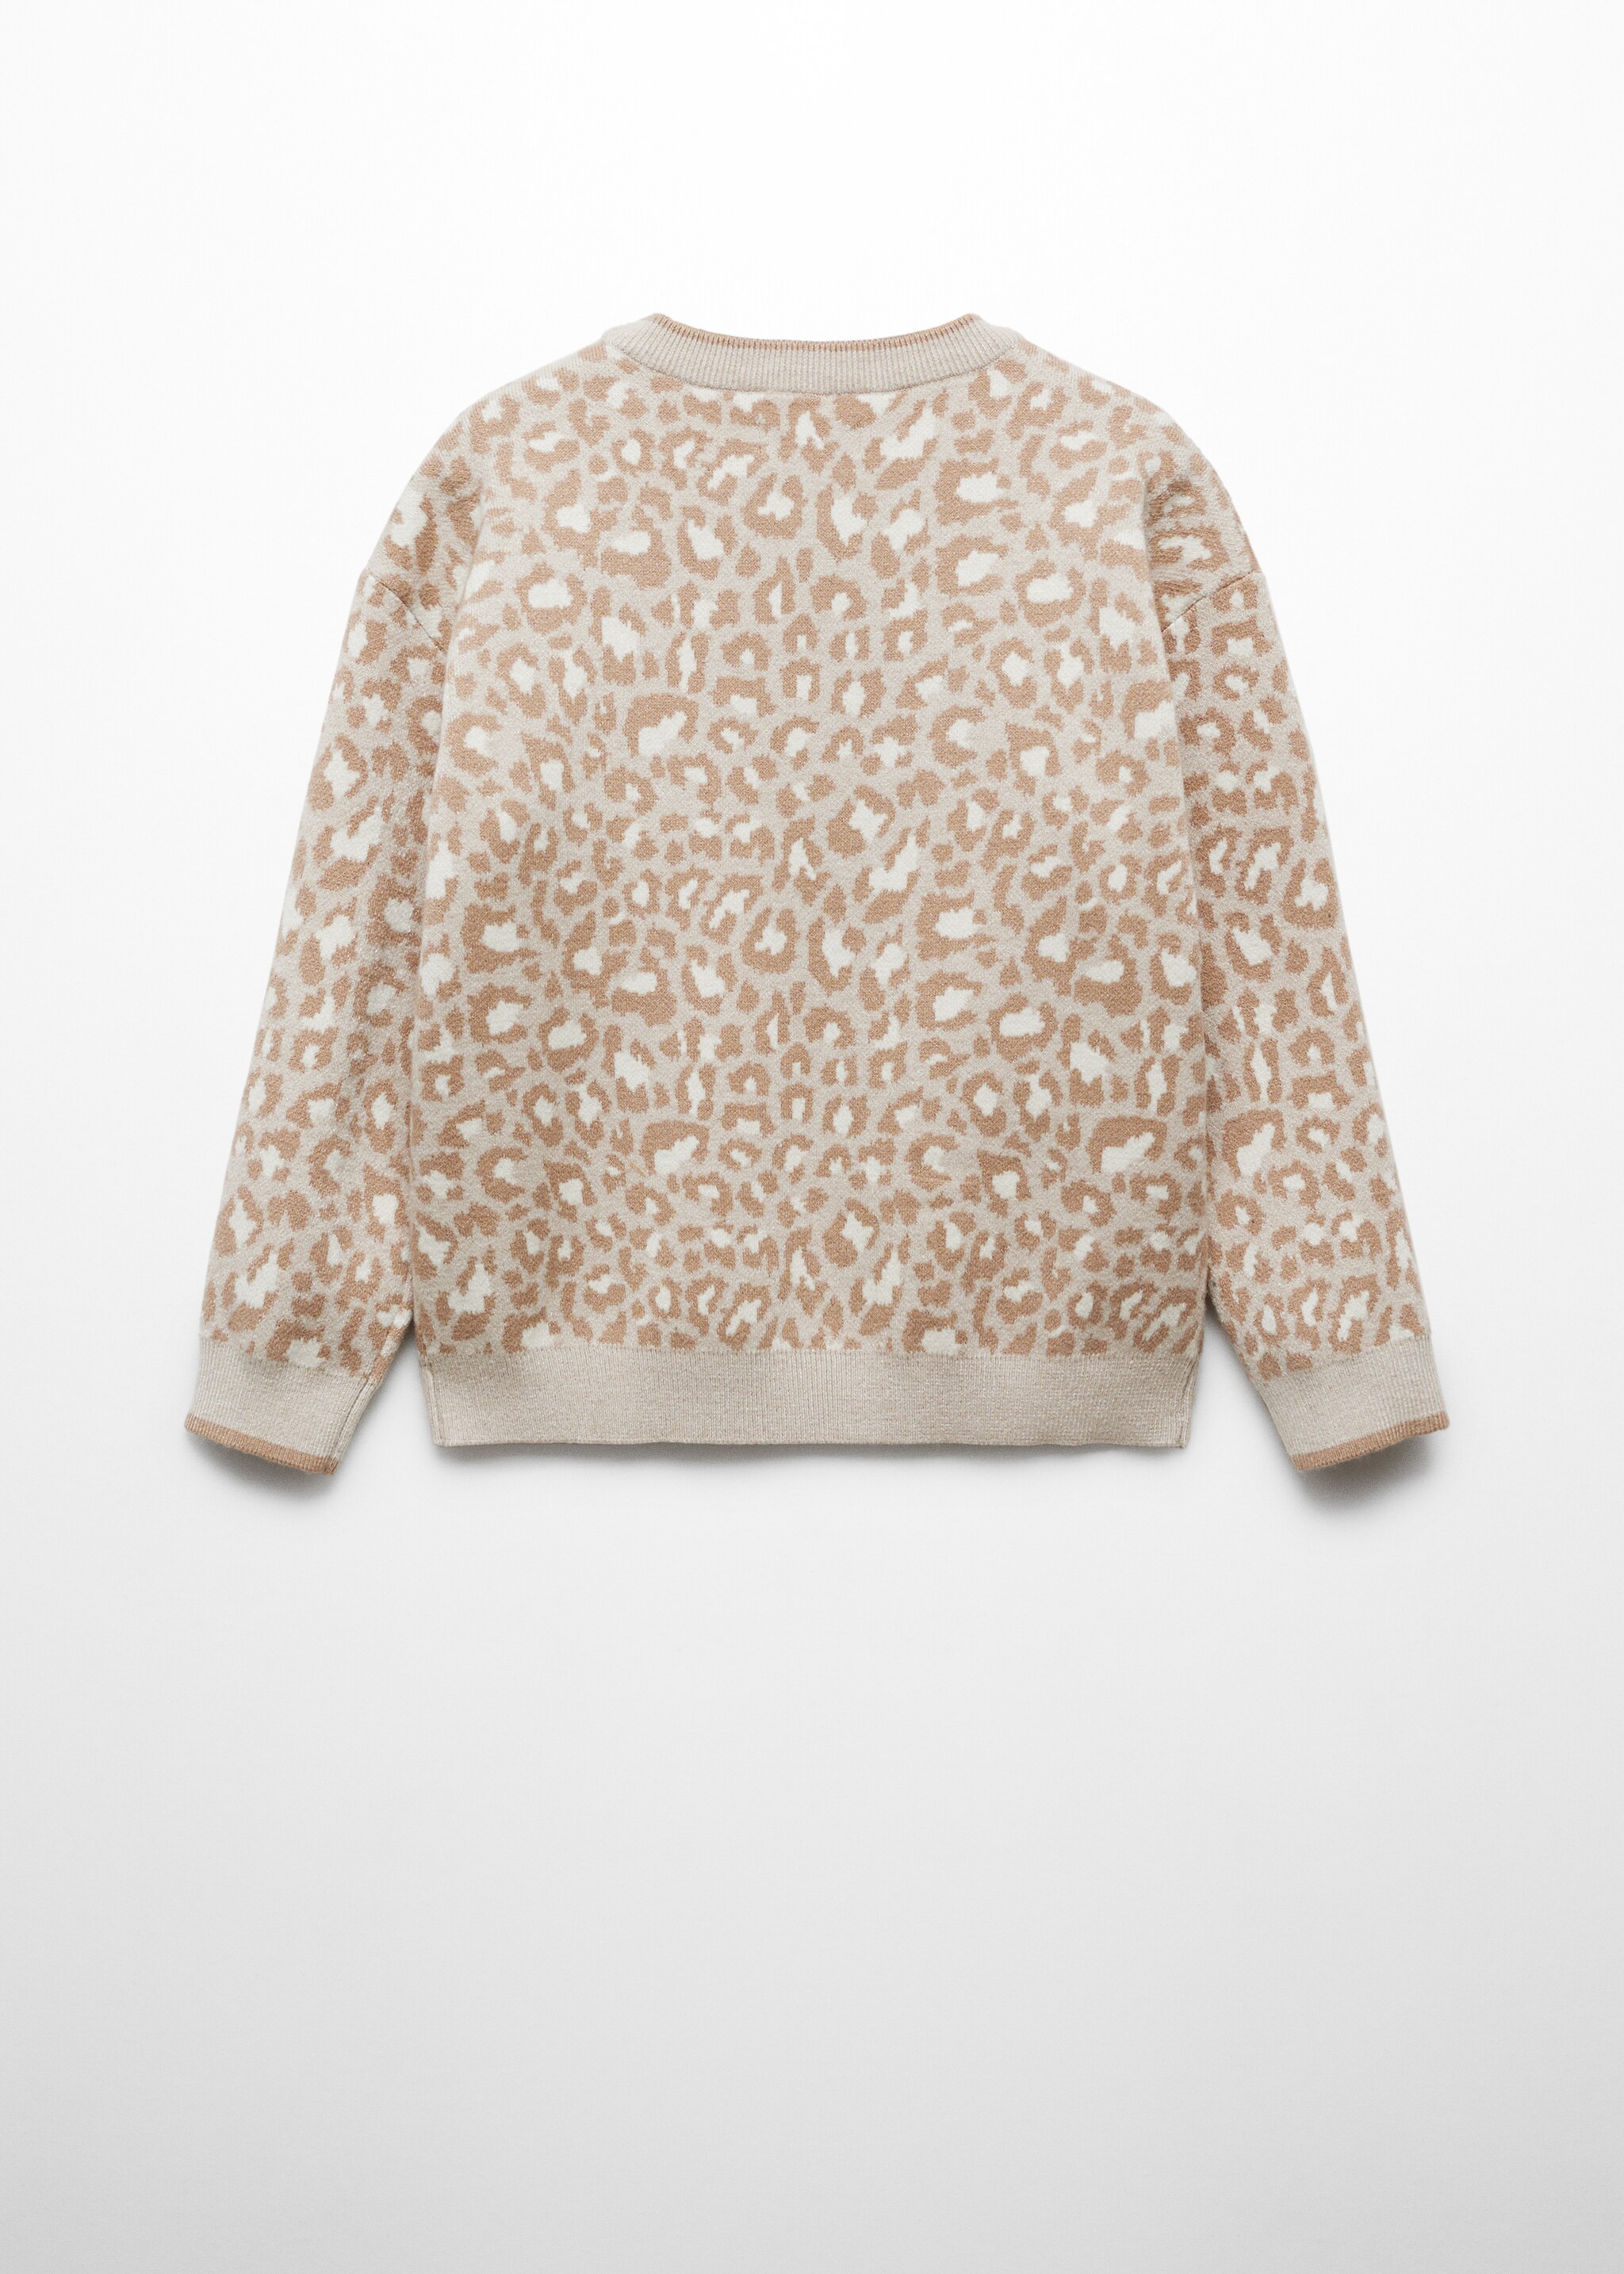 Leopard print sweater - Reverse of the article